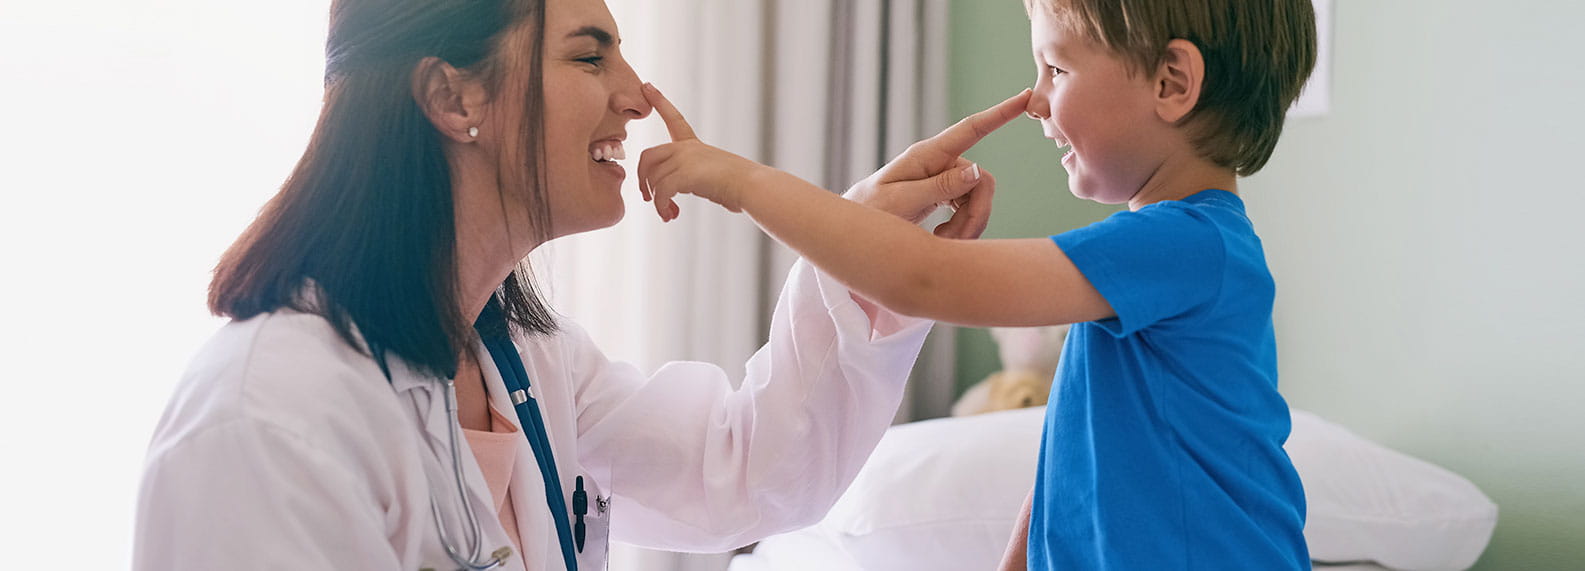 doctor booping a kid's nose